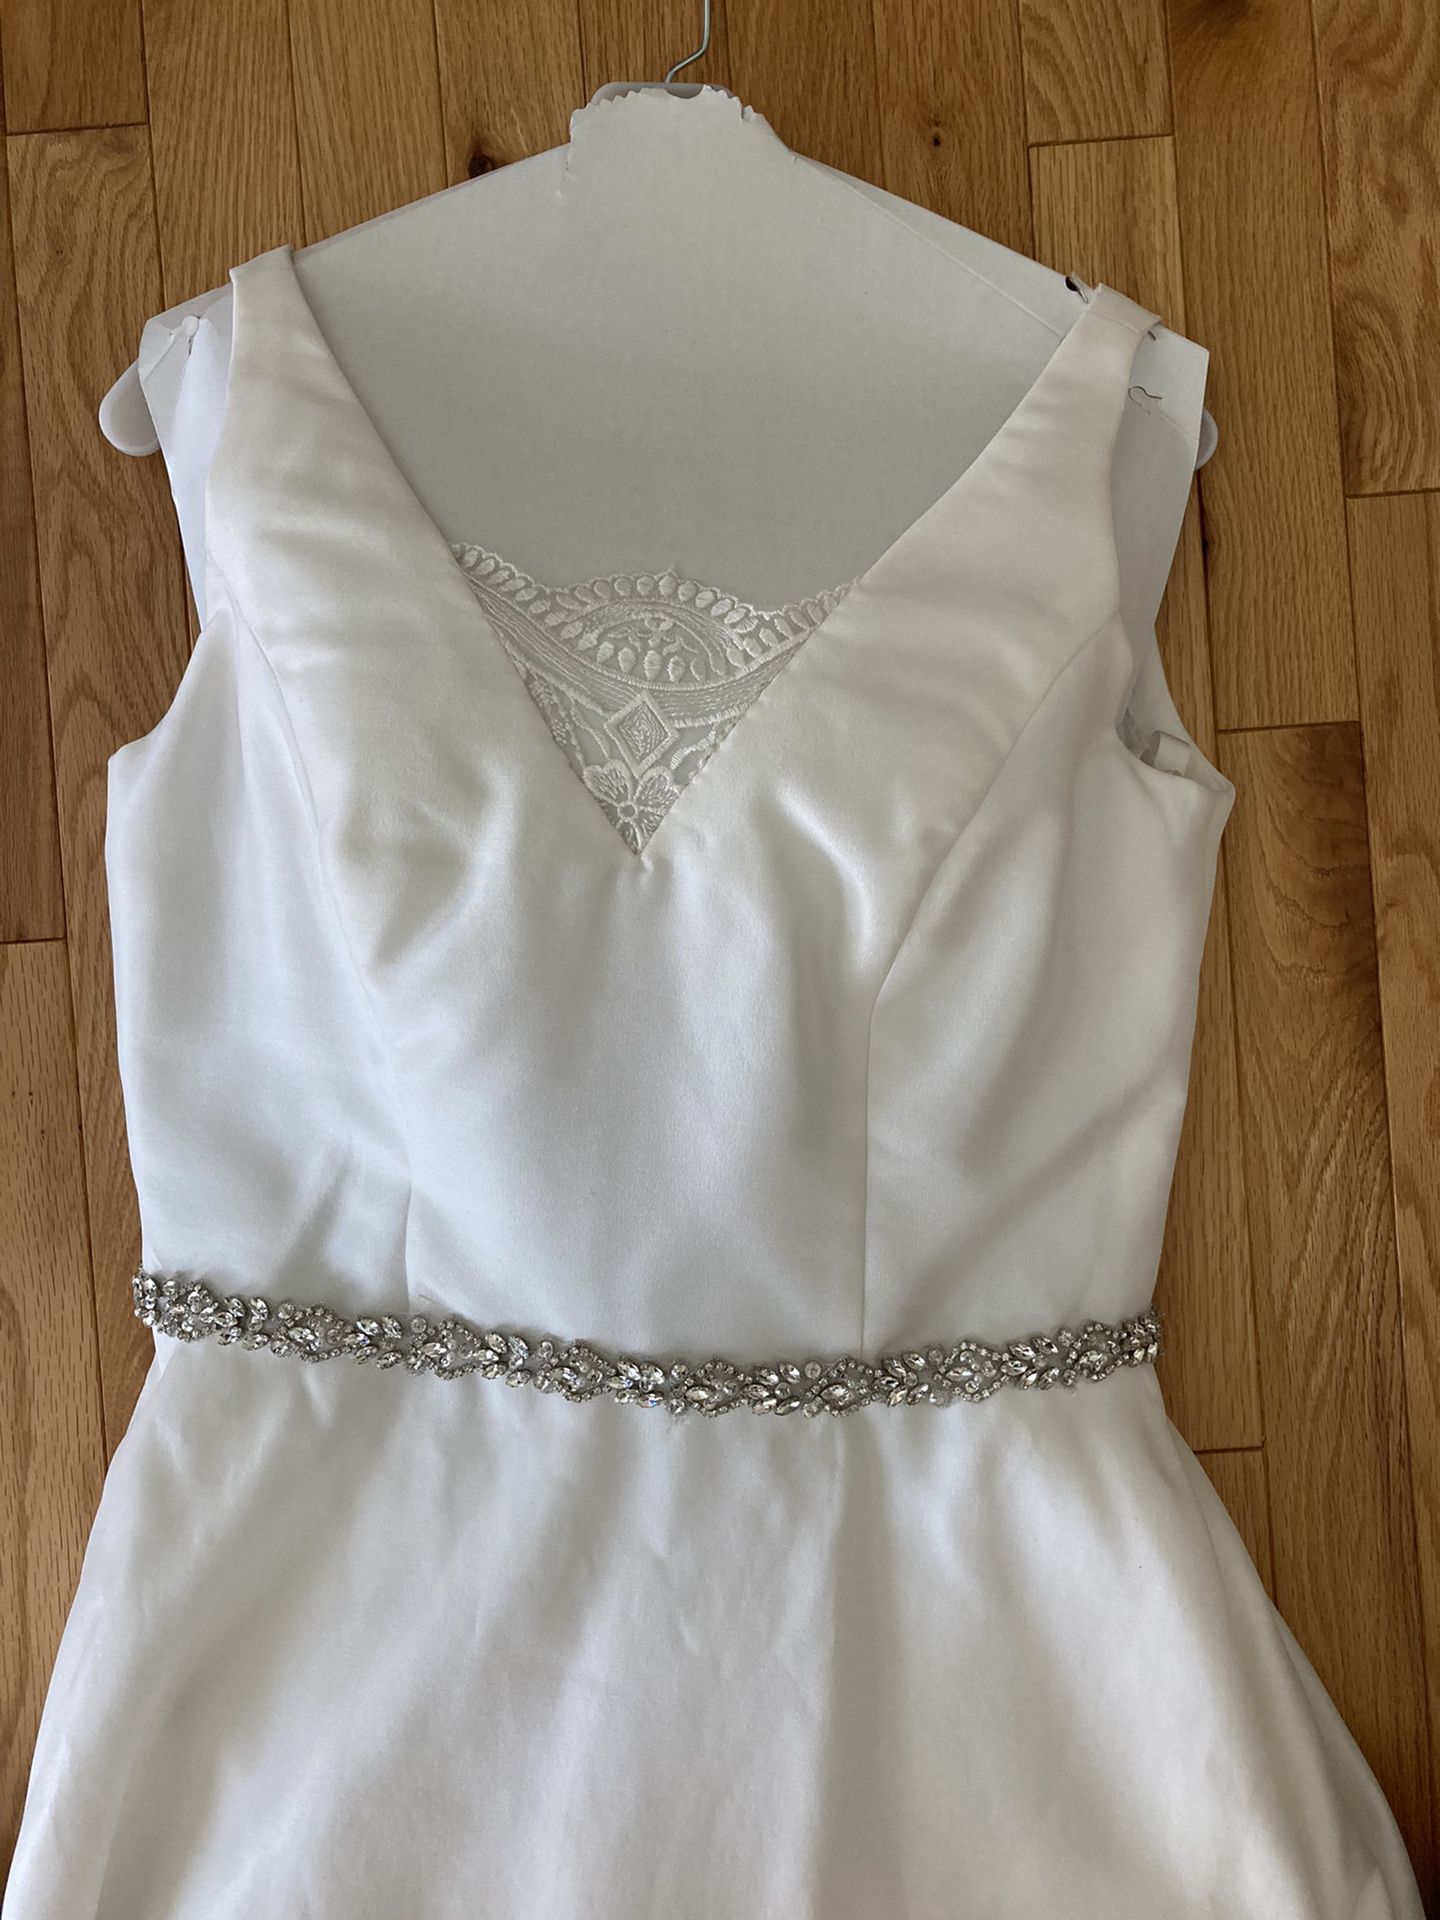 Never Worn Carrafina Size 14 Bridal Gown-price Reduced 